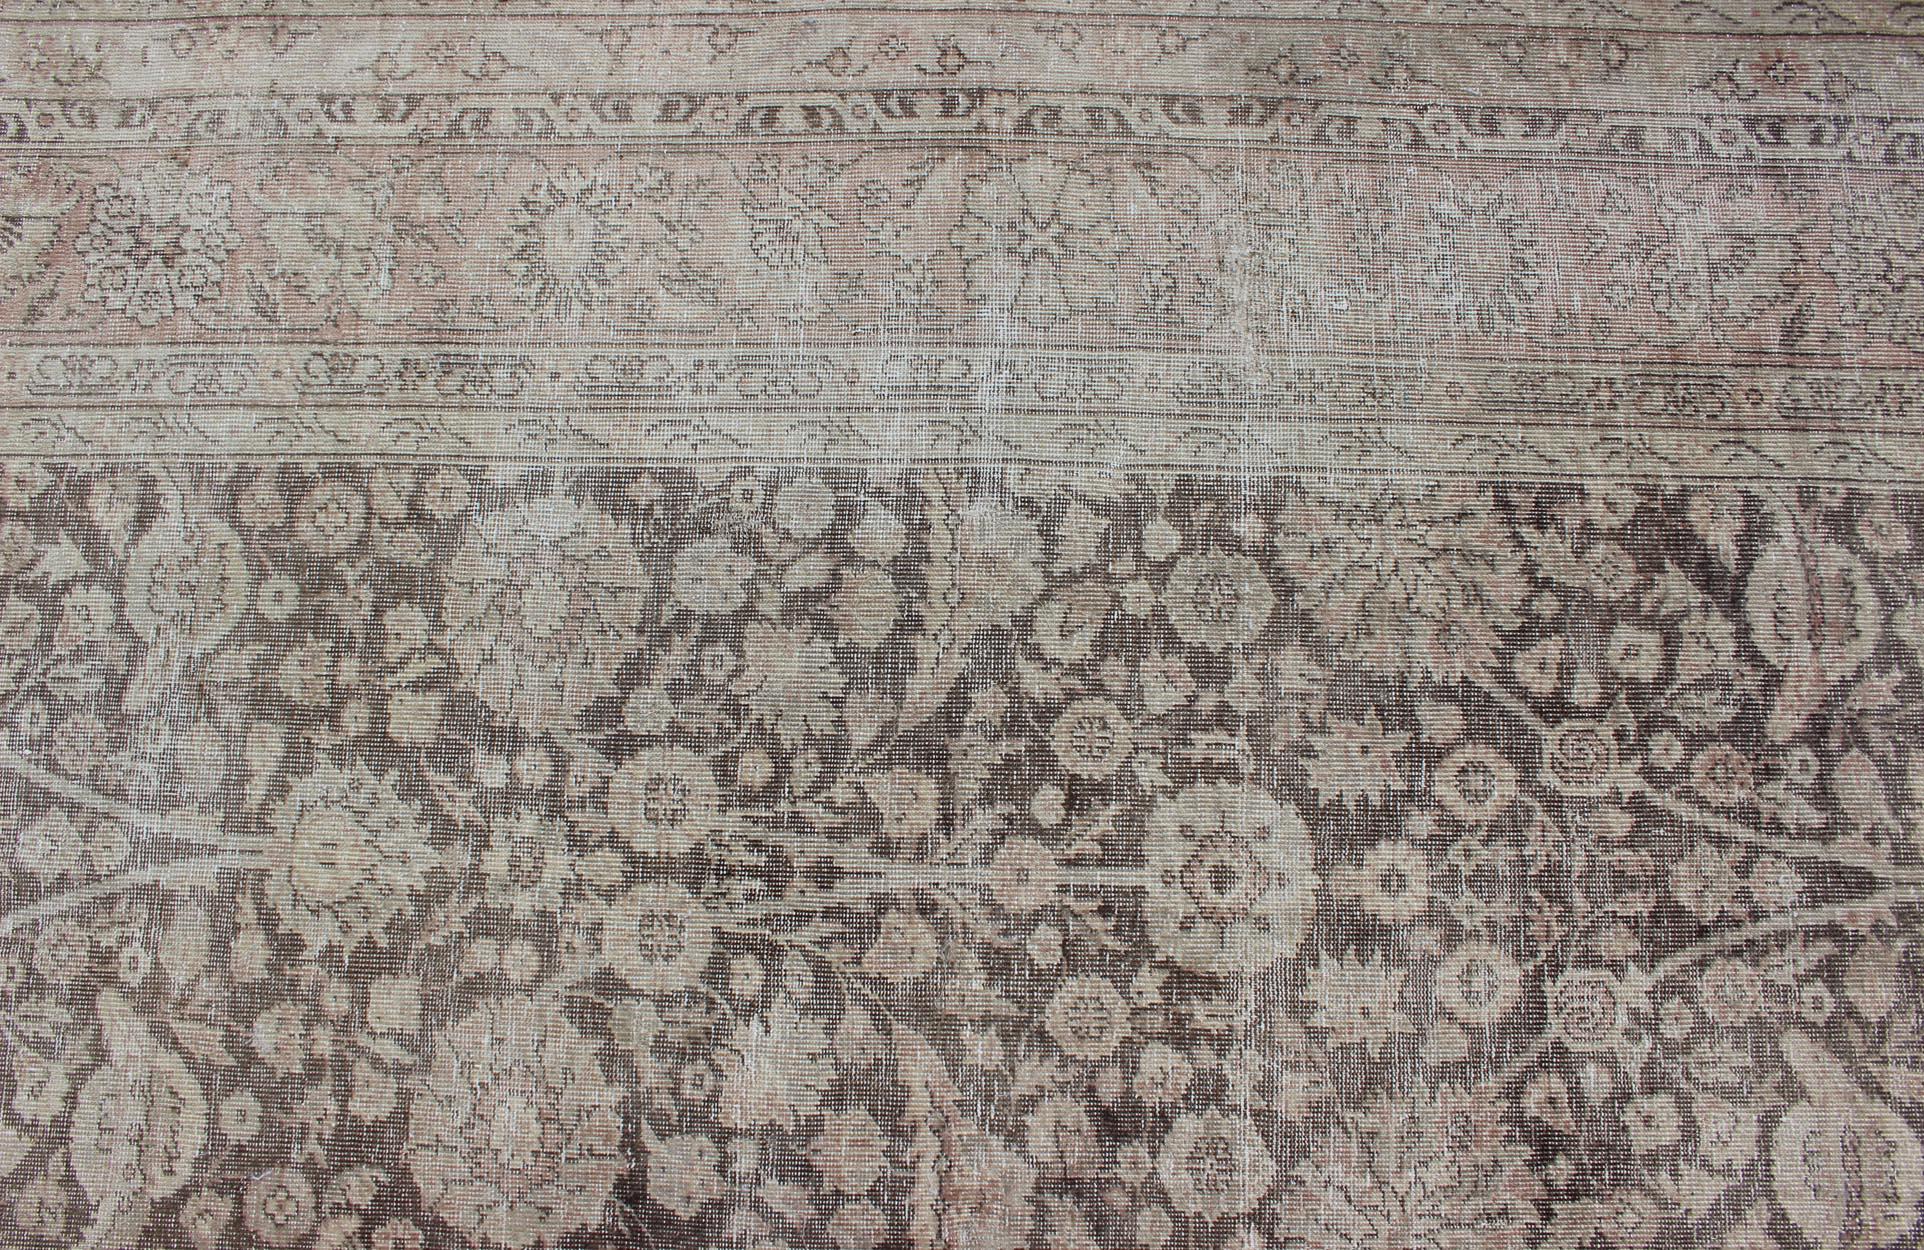 Antique Turkish Oushak Rug with All-Over Floral Design in Earth Tones For Sale 6